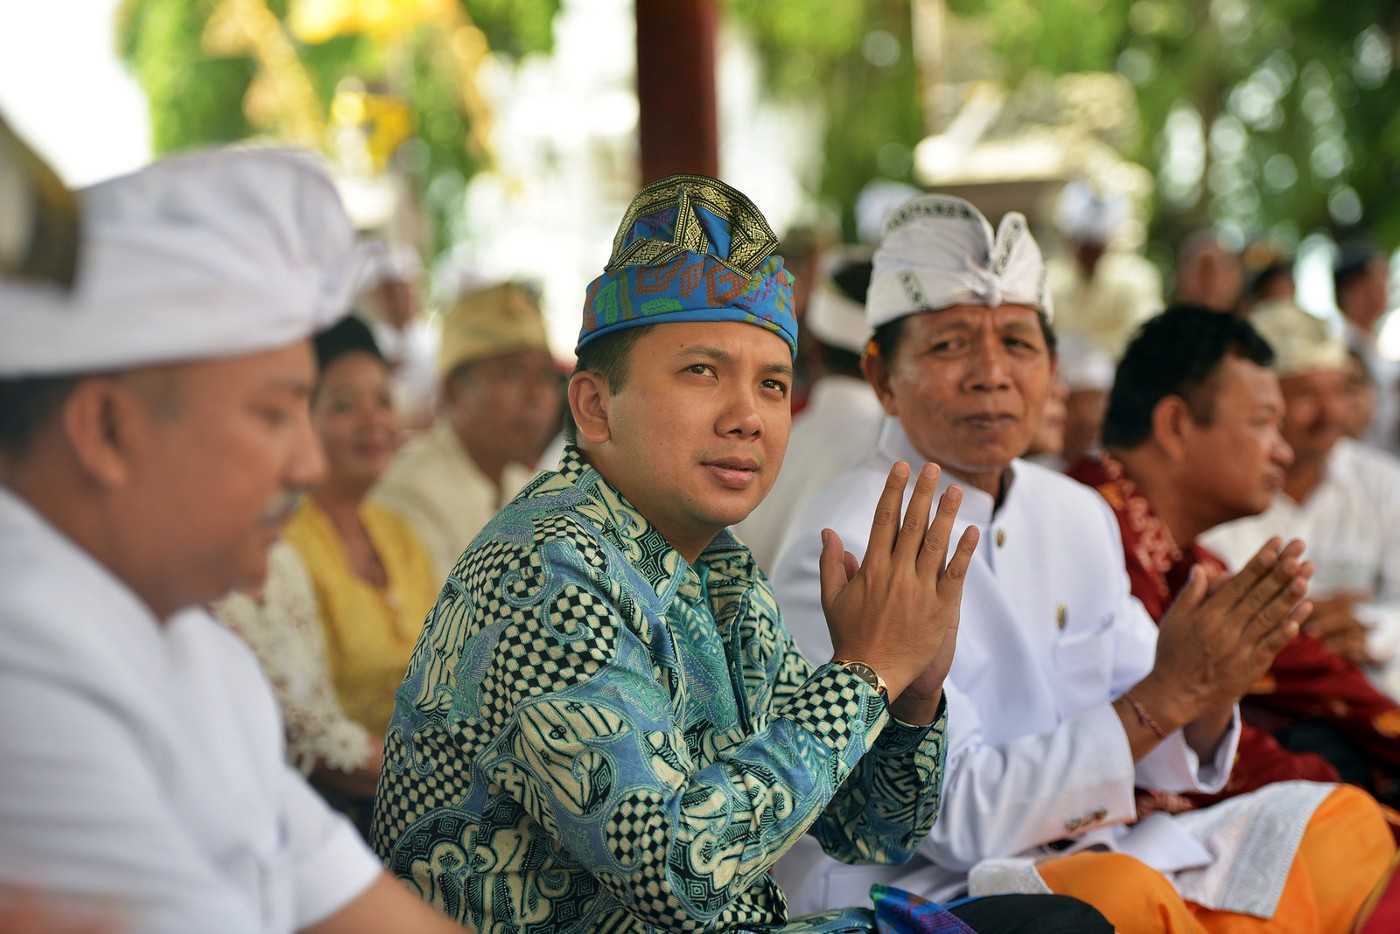 Muhammad Ridho Ficardo dons Balinese clothing for a Hindu ceremony in Lampung. 